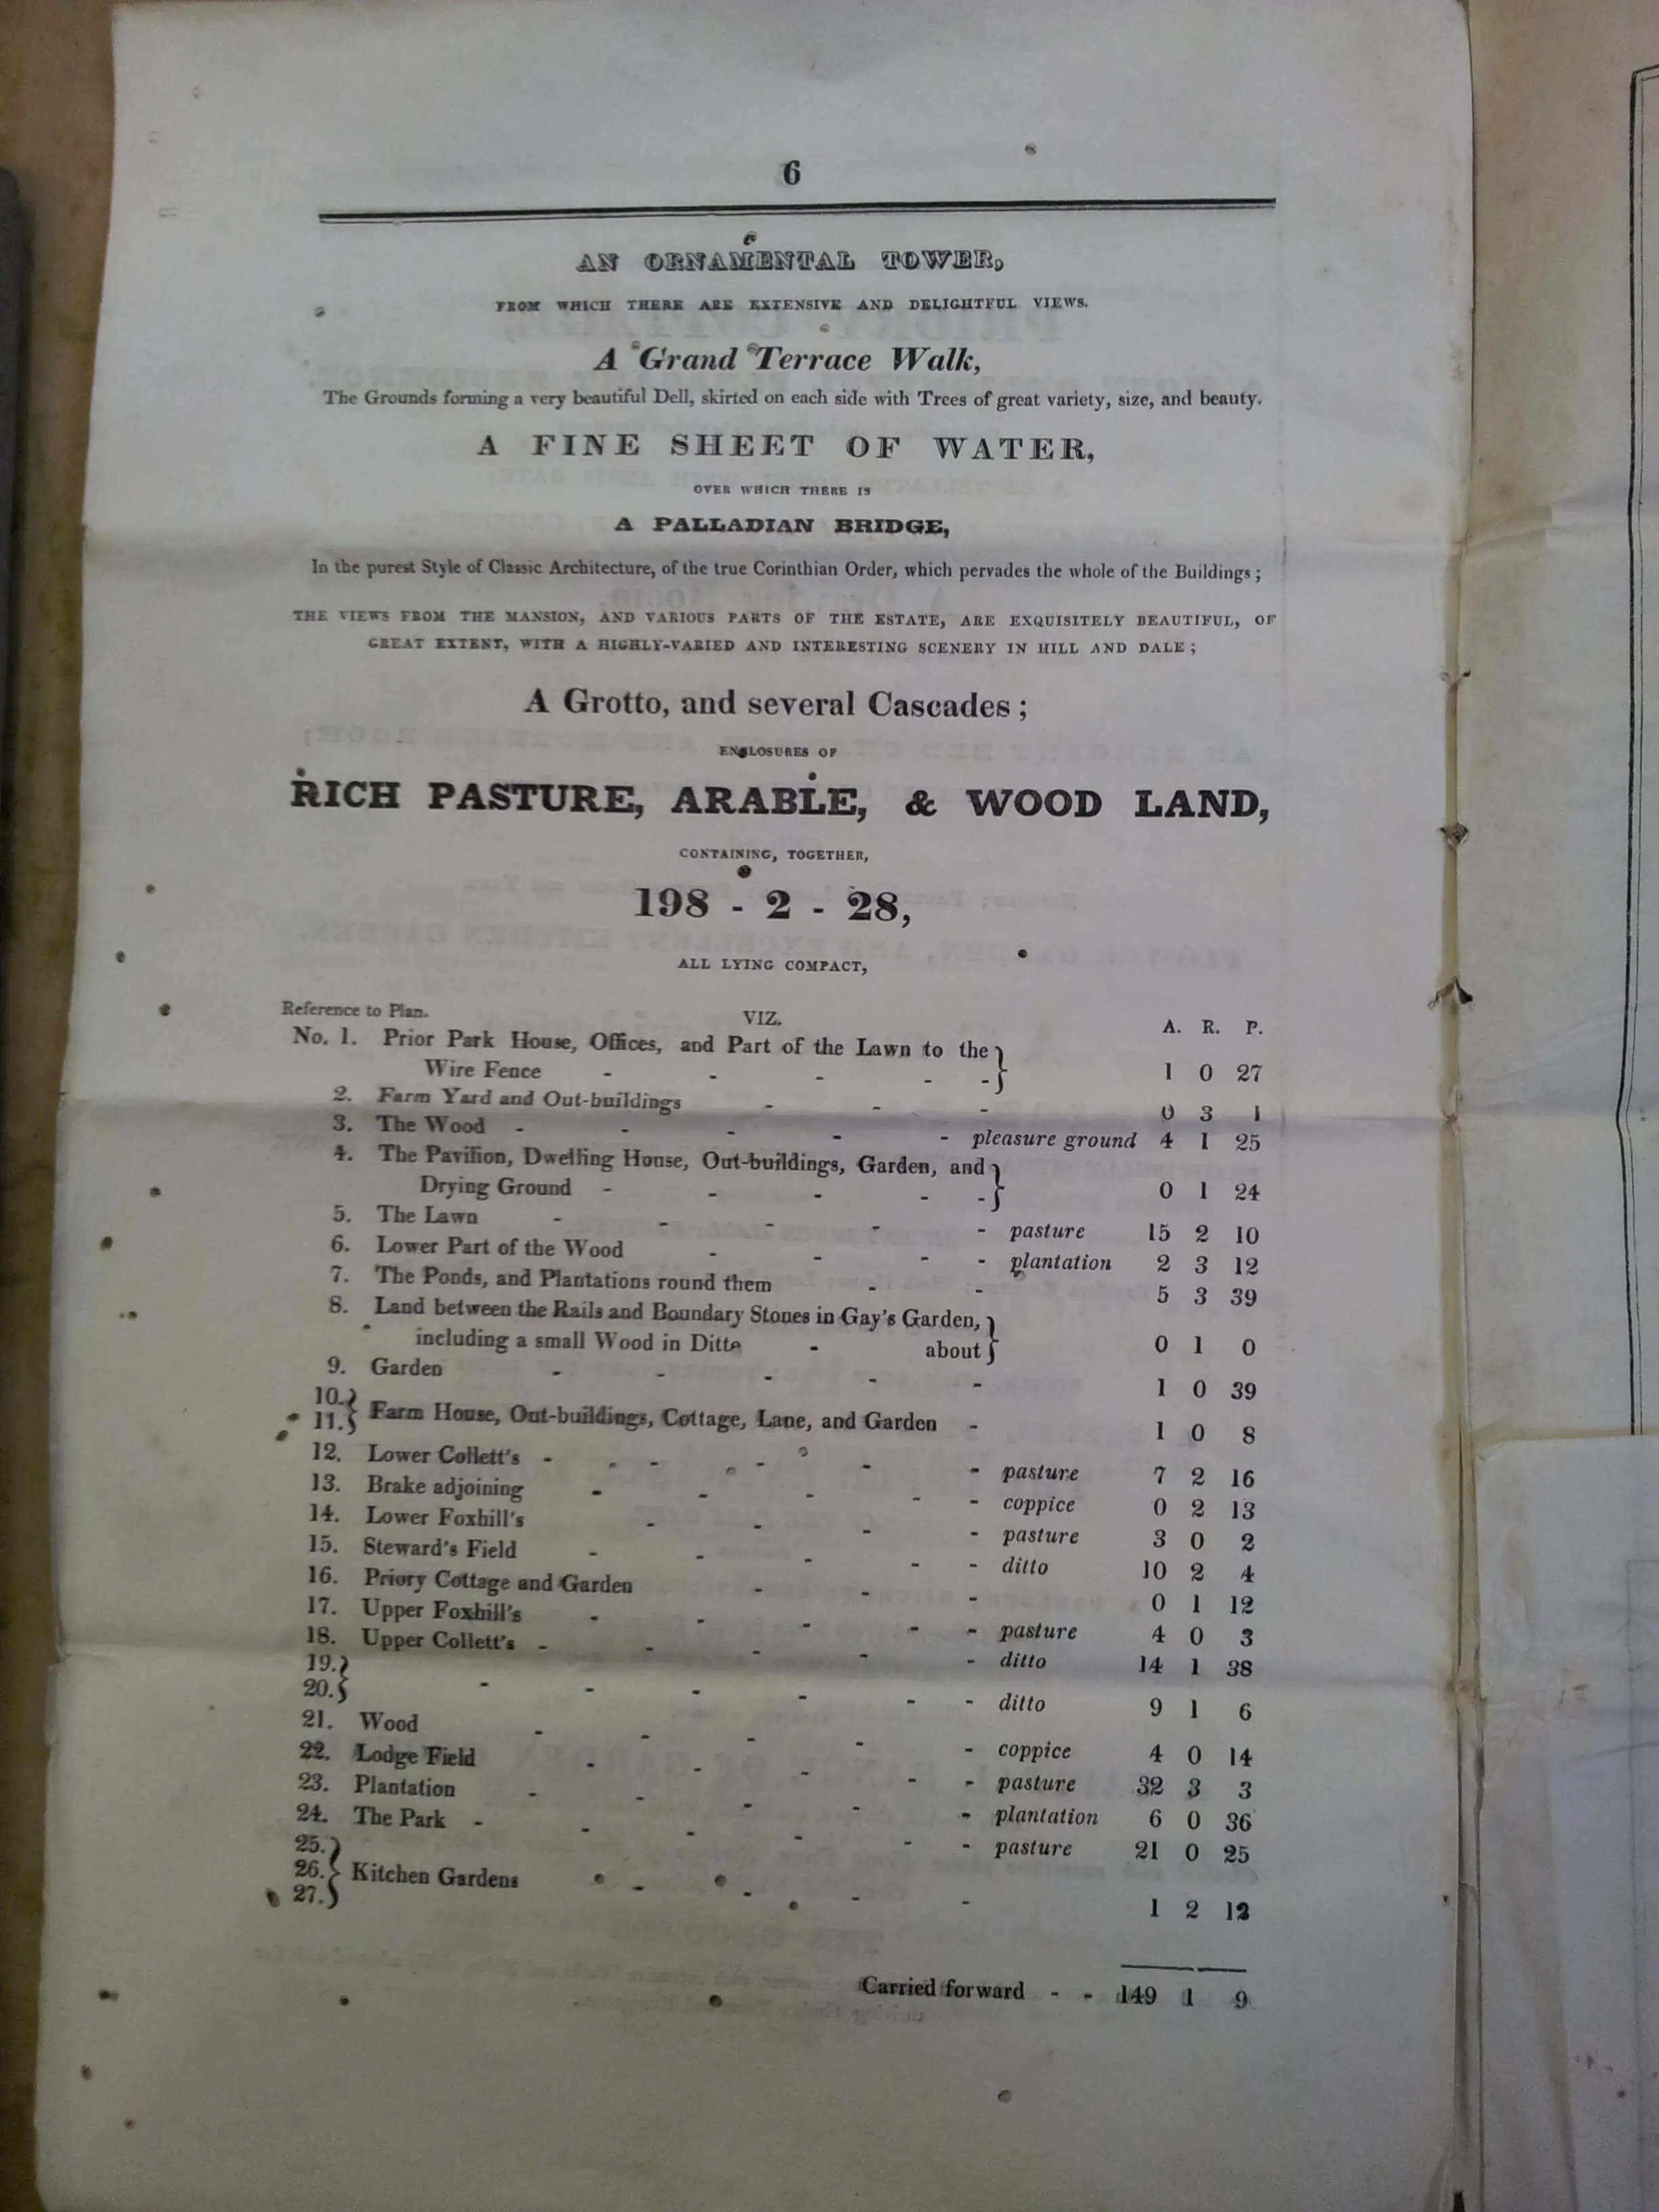 More details of sale particulars for Prior Park in 1808